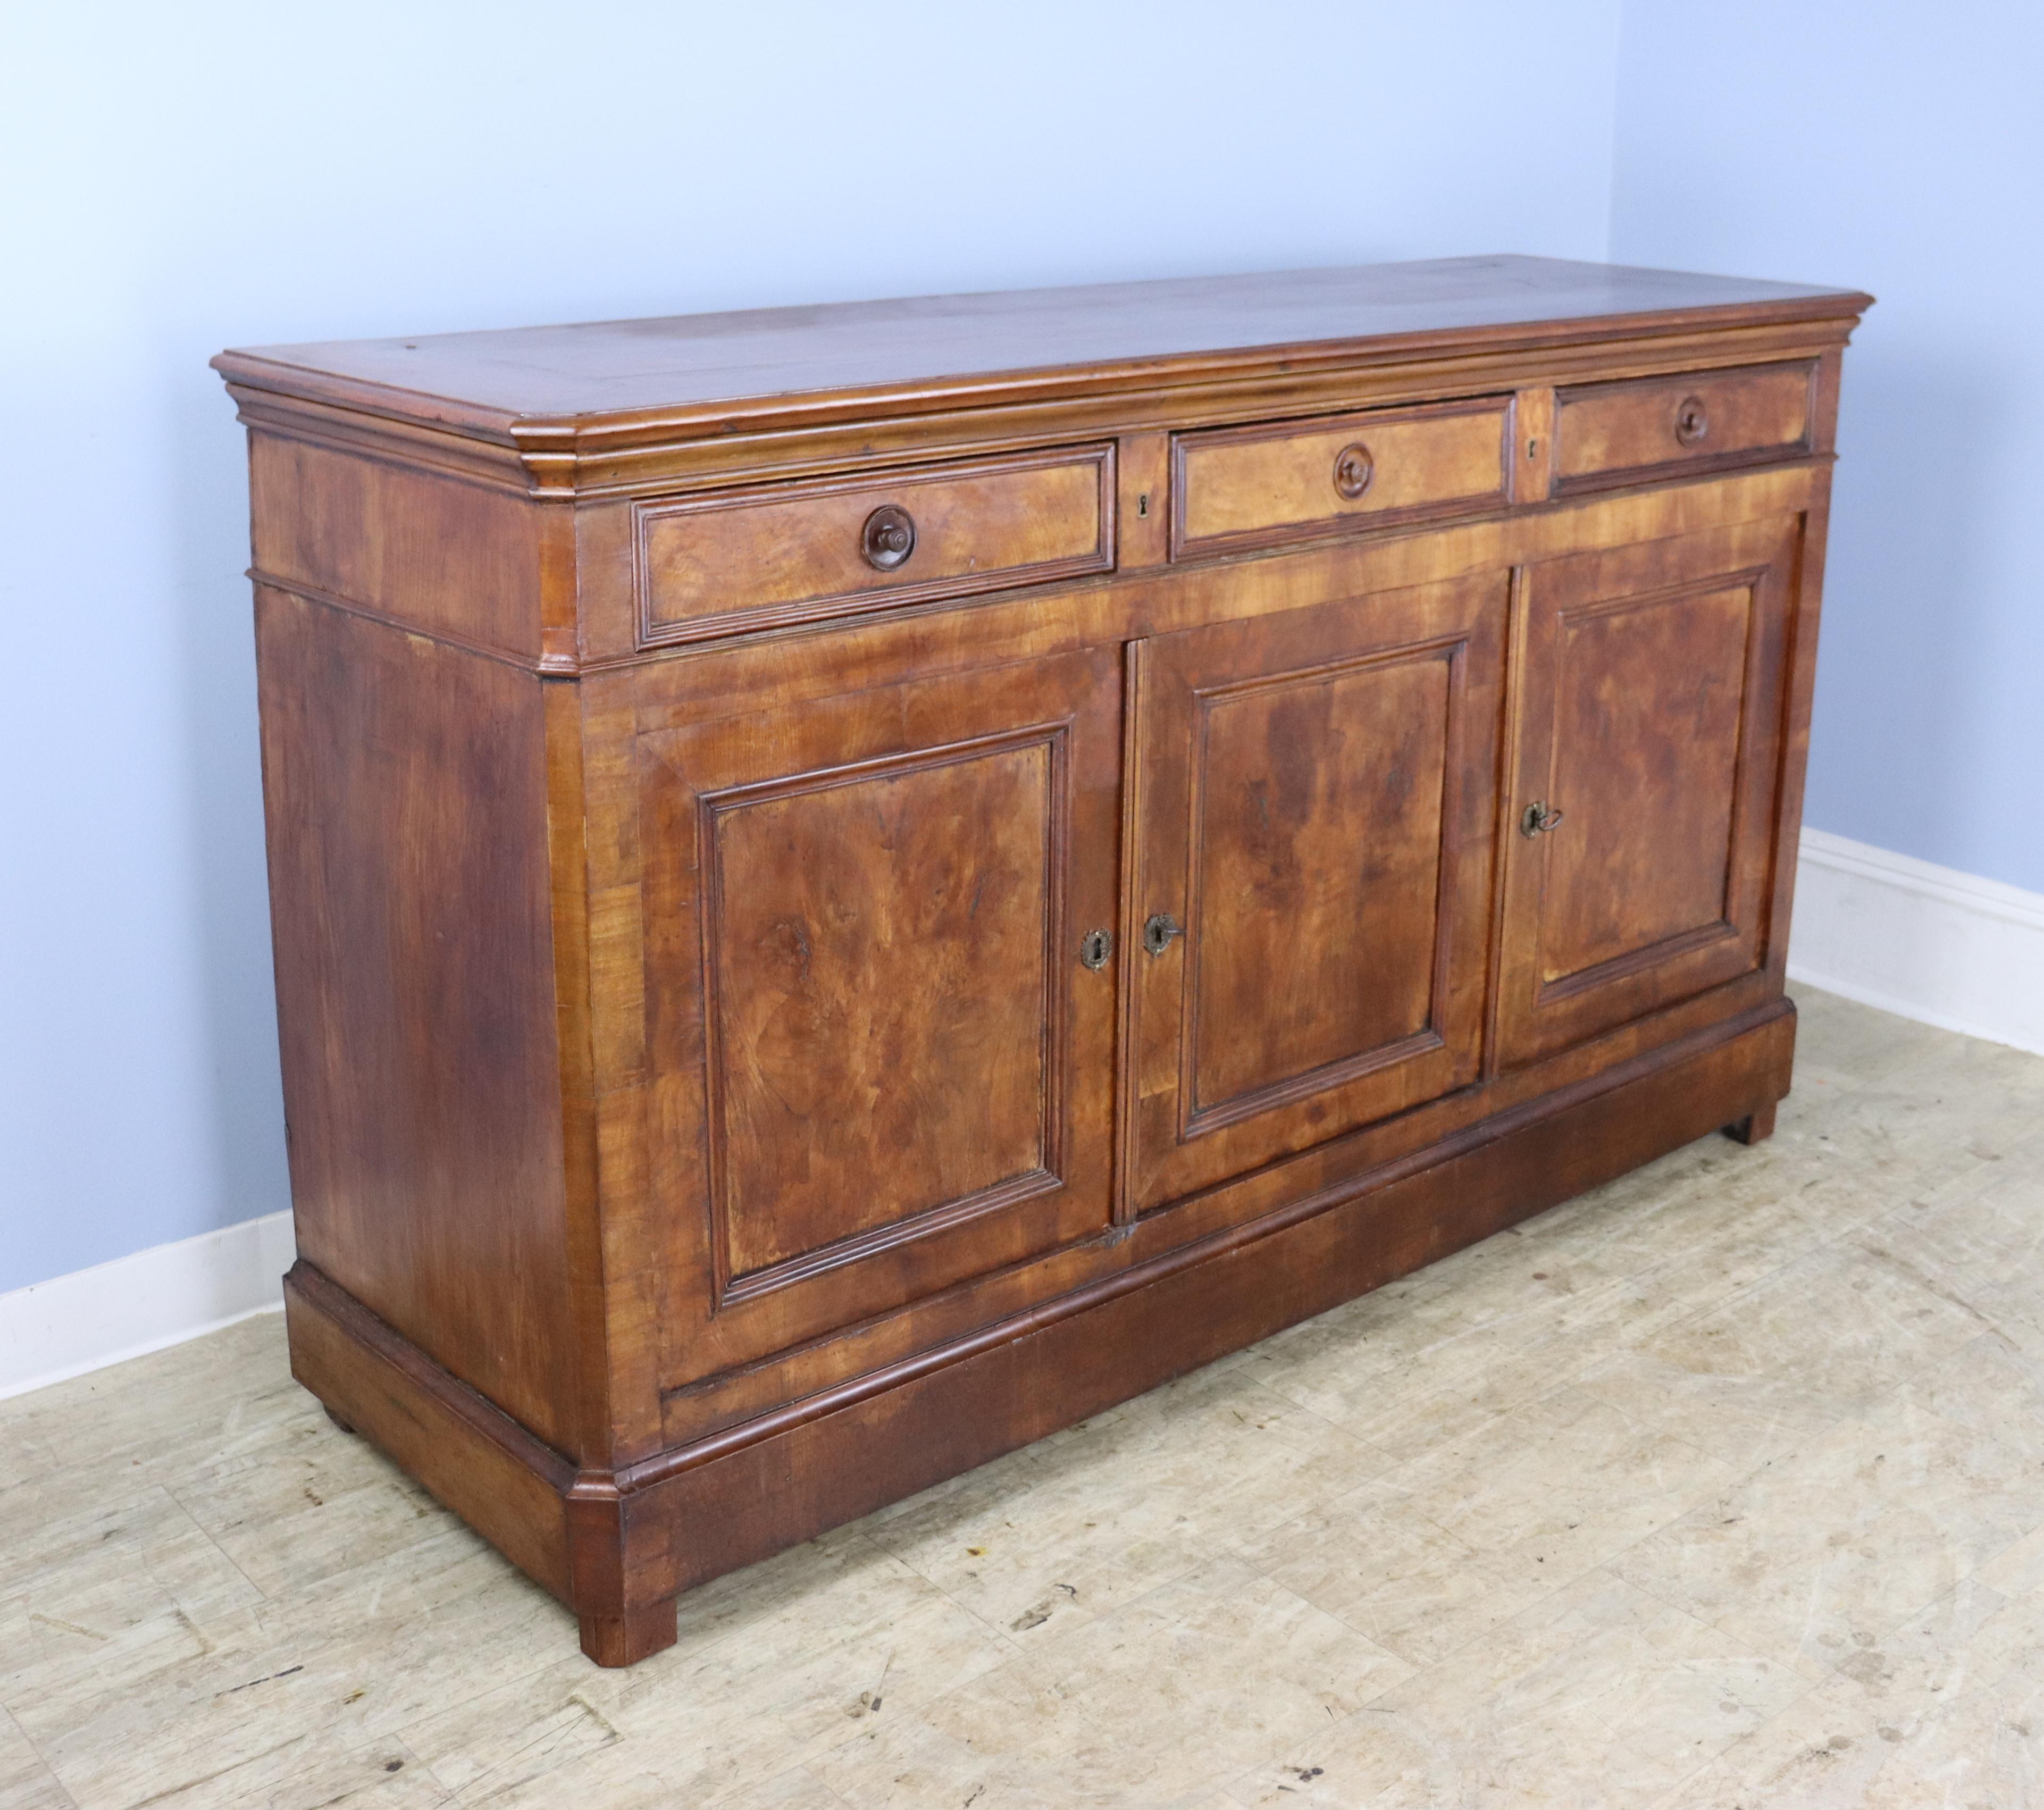 Very good, long three-door enfilade with beautiful elm grain highlighted by dramatically colored inset panels on the doors. Glorious glow and patina. This piece has Classic Louis Philippe details including canted corners and lovely beading around